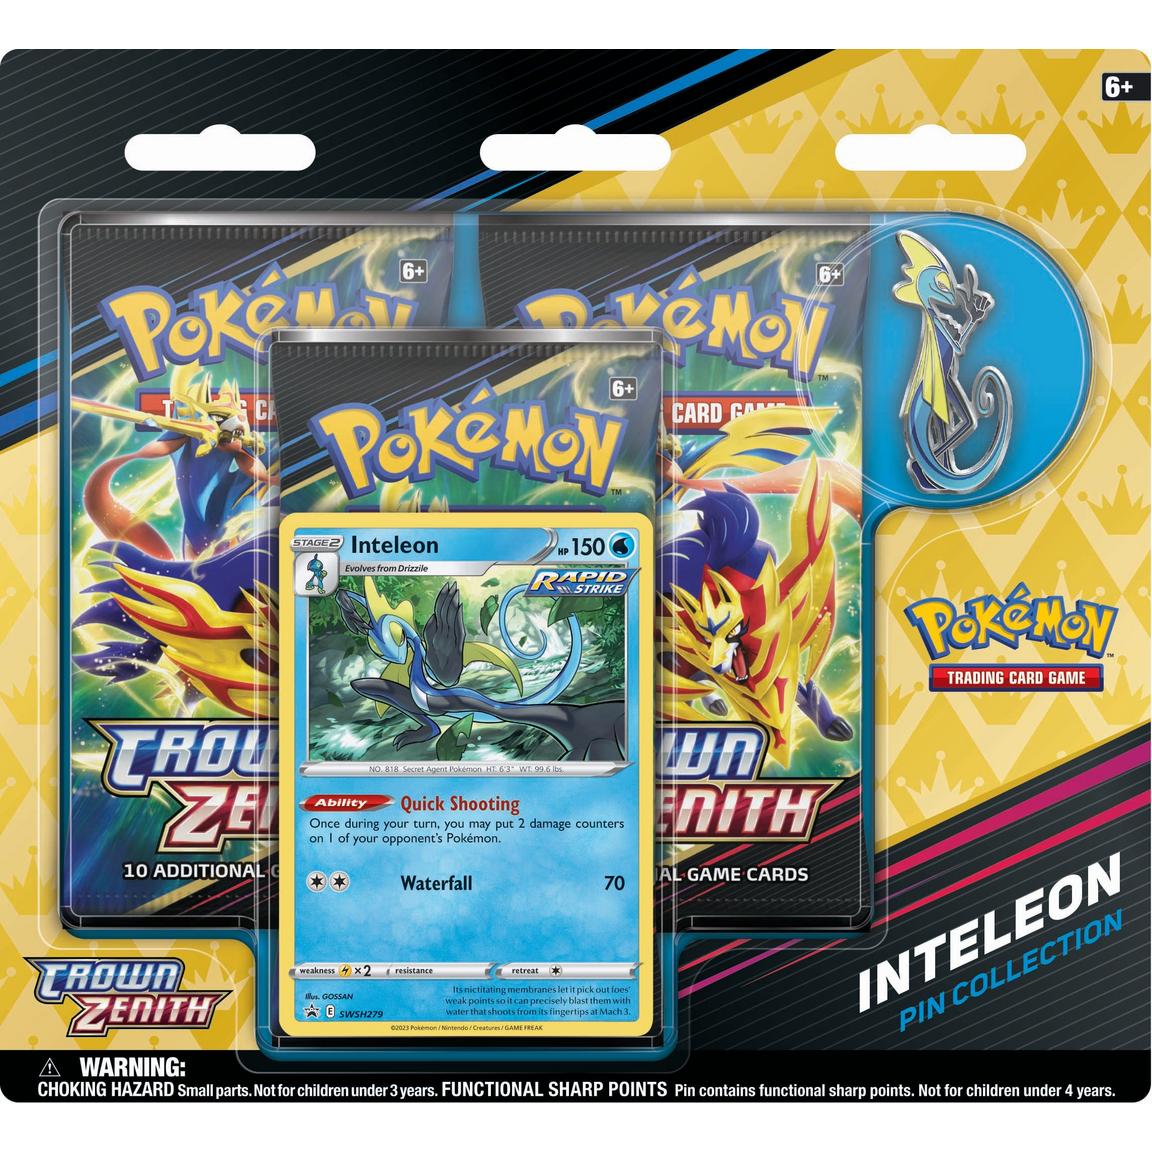 Pokemon TCG Crown Zenith Pin Collection 12.5 Blister Pack